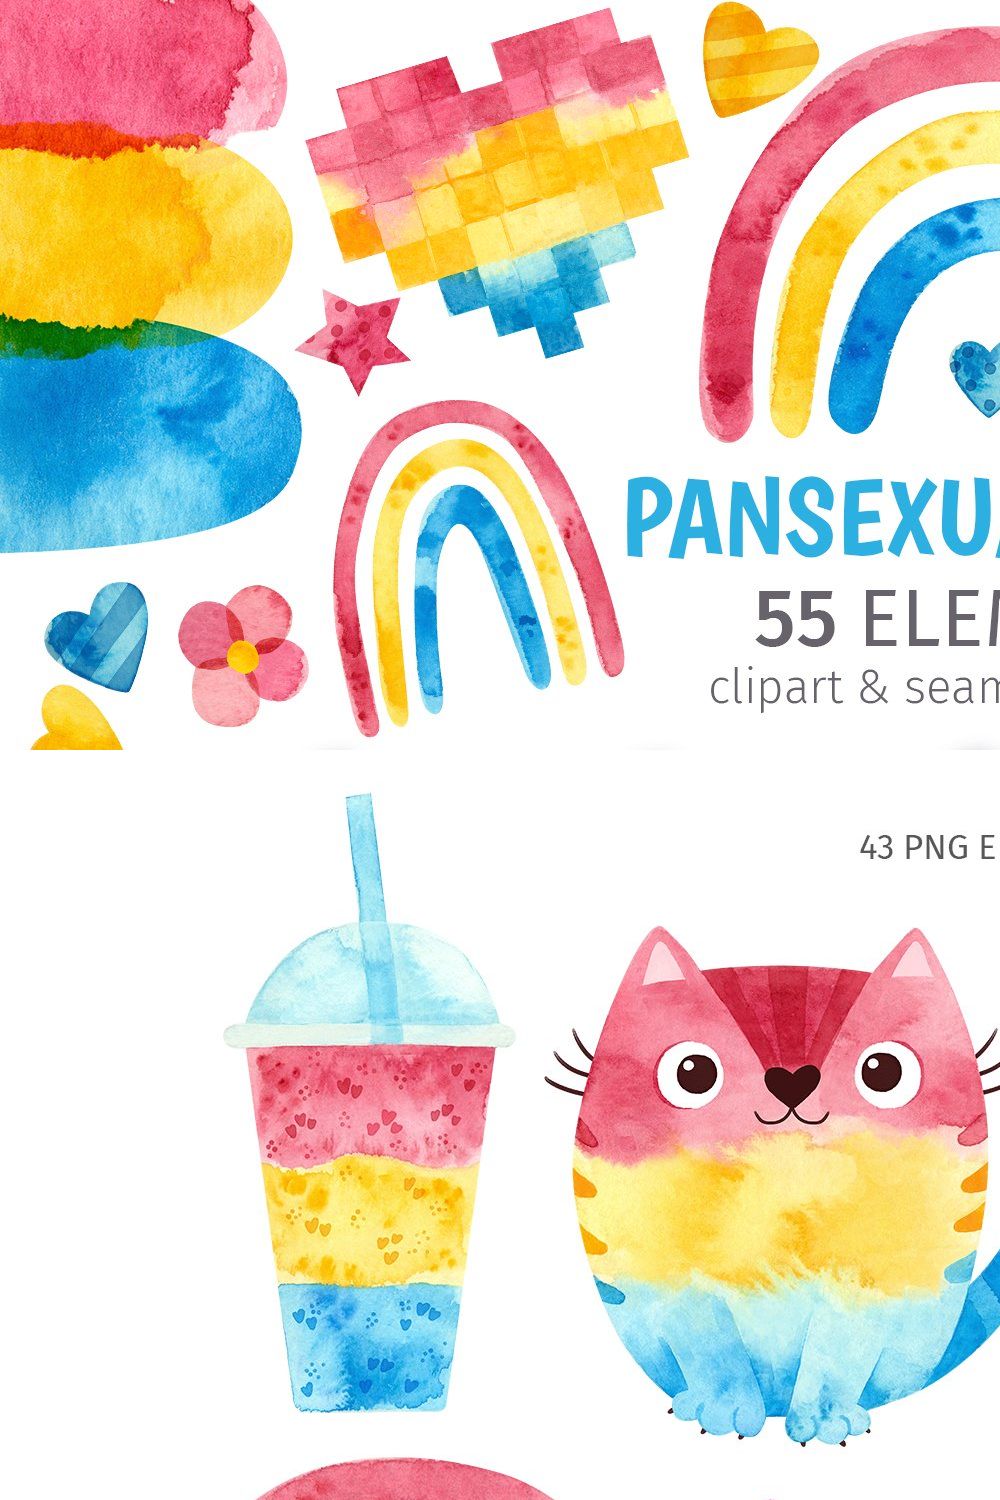 Pansexual pride clipart & patterns pinterest preview image.